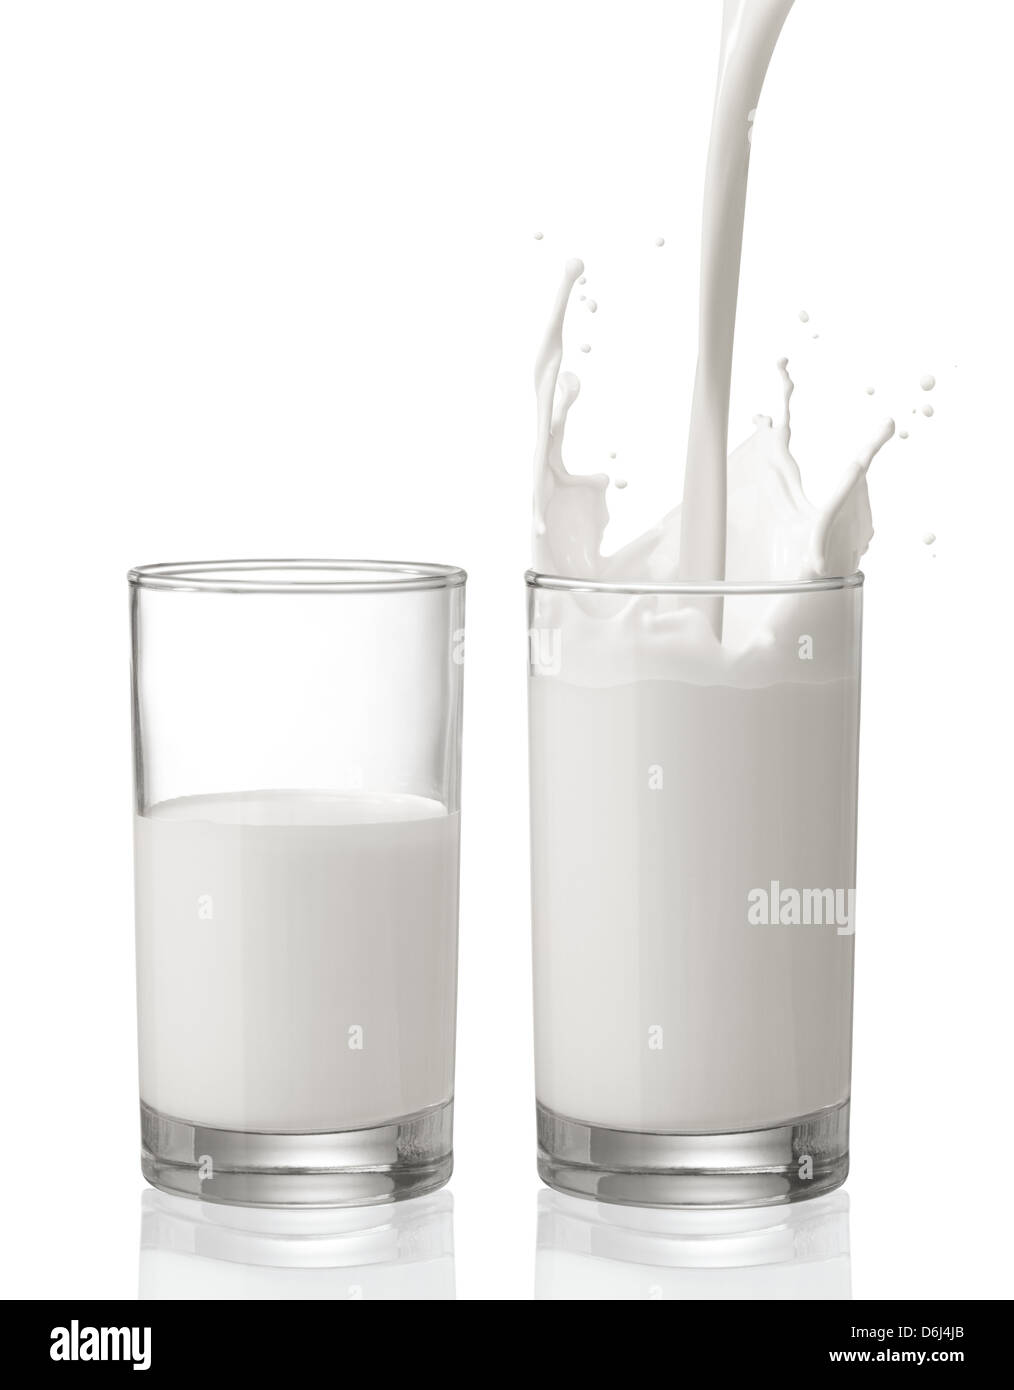 pouring milk creating splash with a glass of half full milk beside Stock Photo